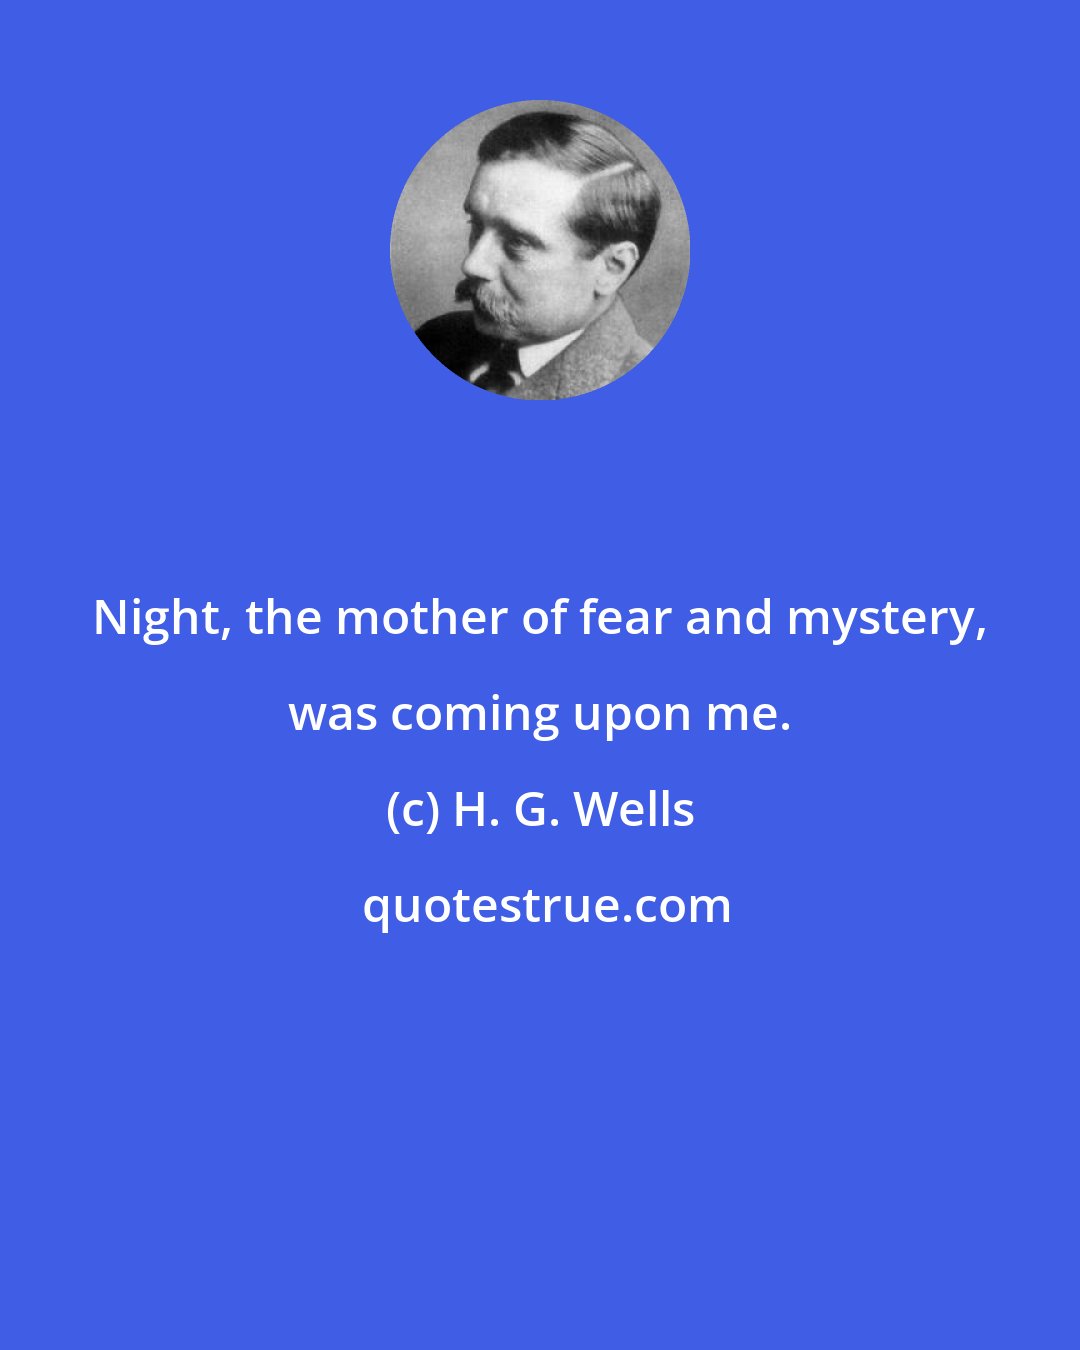 H. G. Wells: Night, the mother of fear and mystery, was coming upon me.